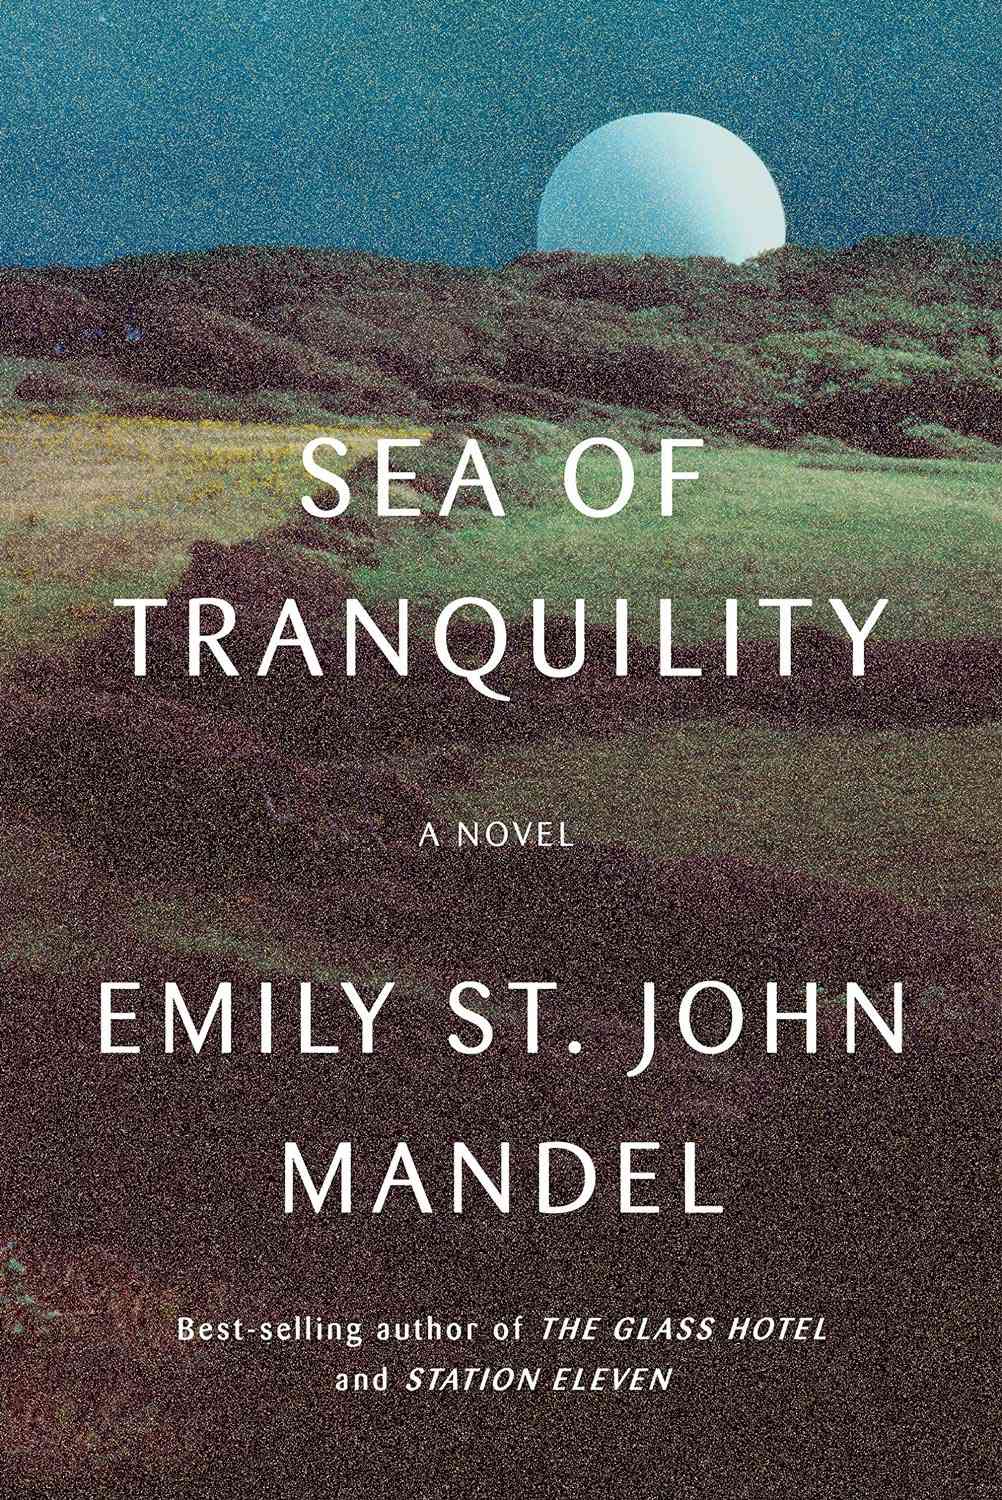 Sea of Tranquility: A novel Hardcover – April 5, 2022 by Emily St. John Mandel